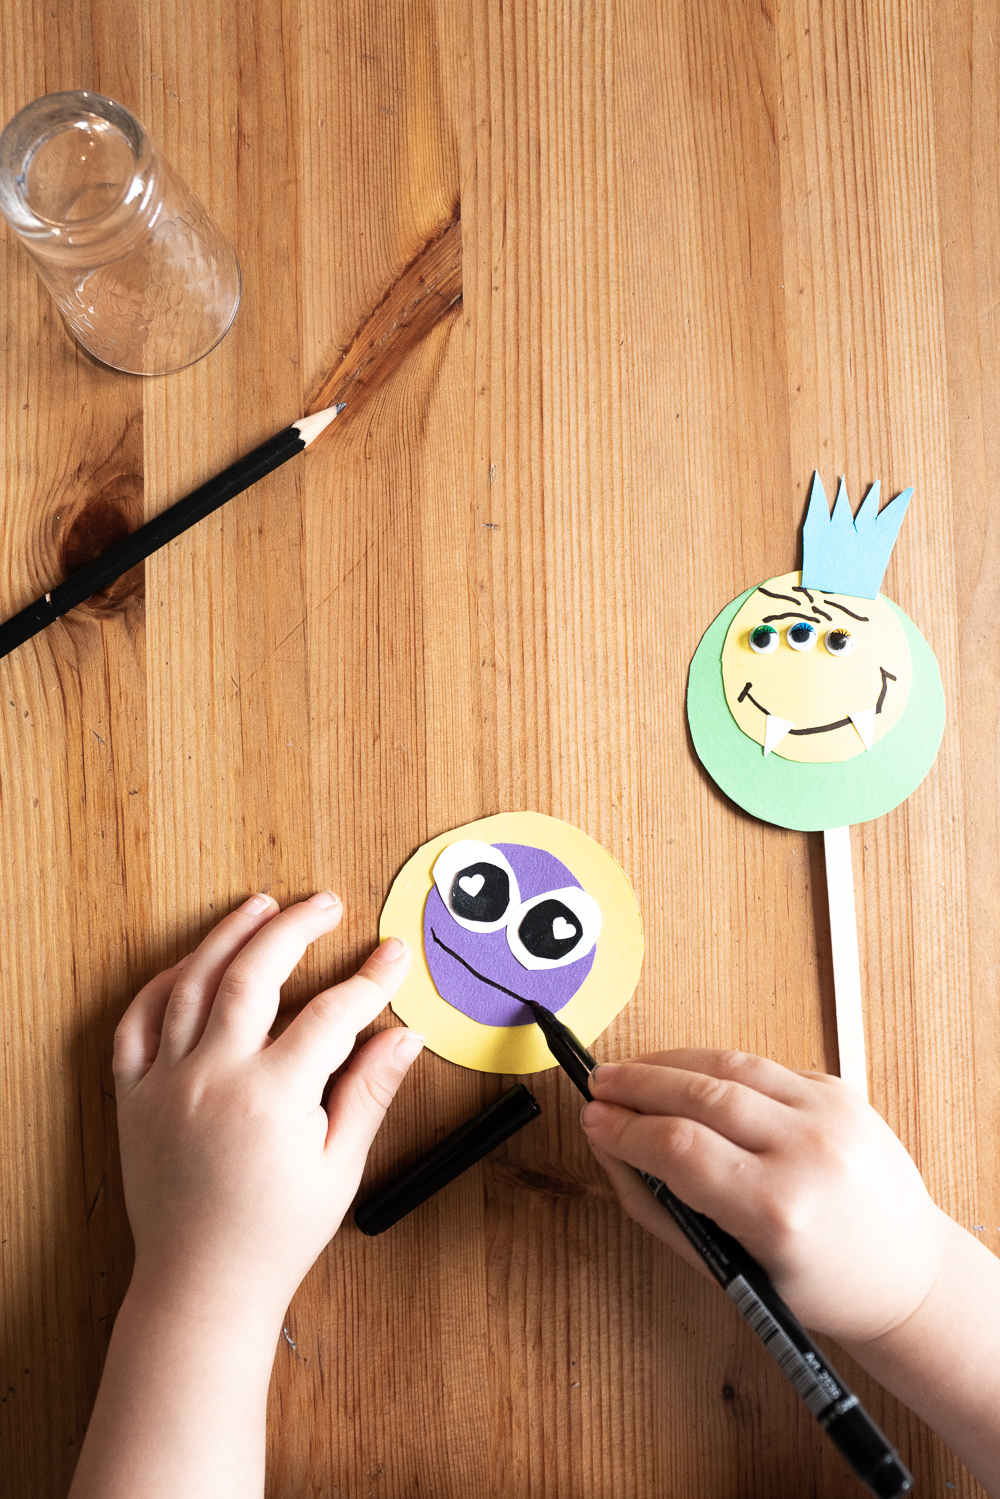 diy monster cupcake toppers for kids' parties